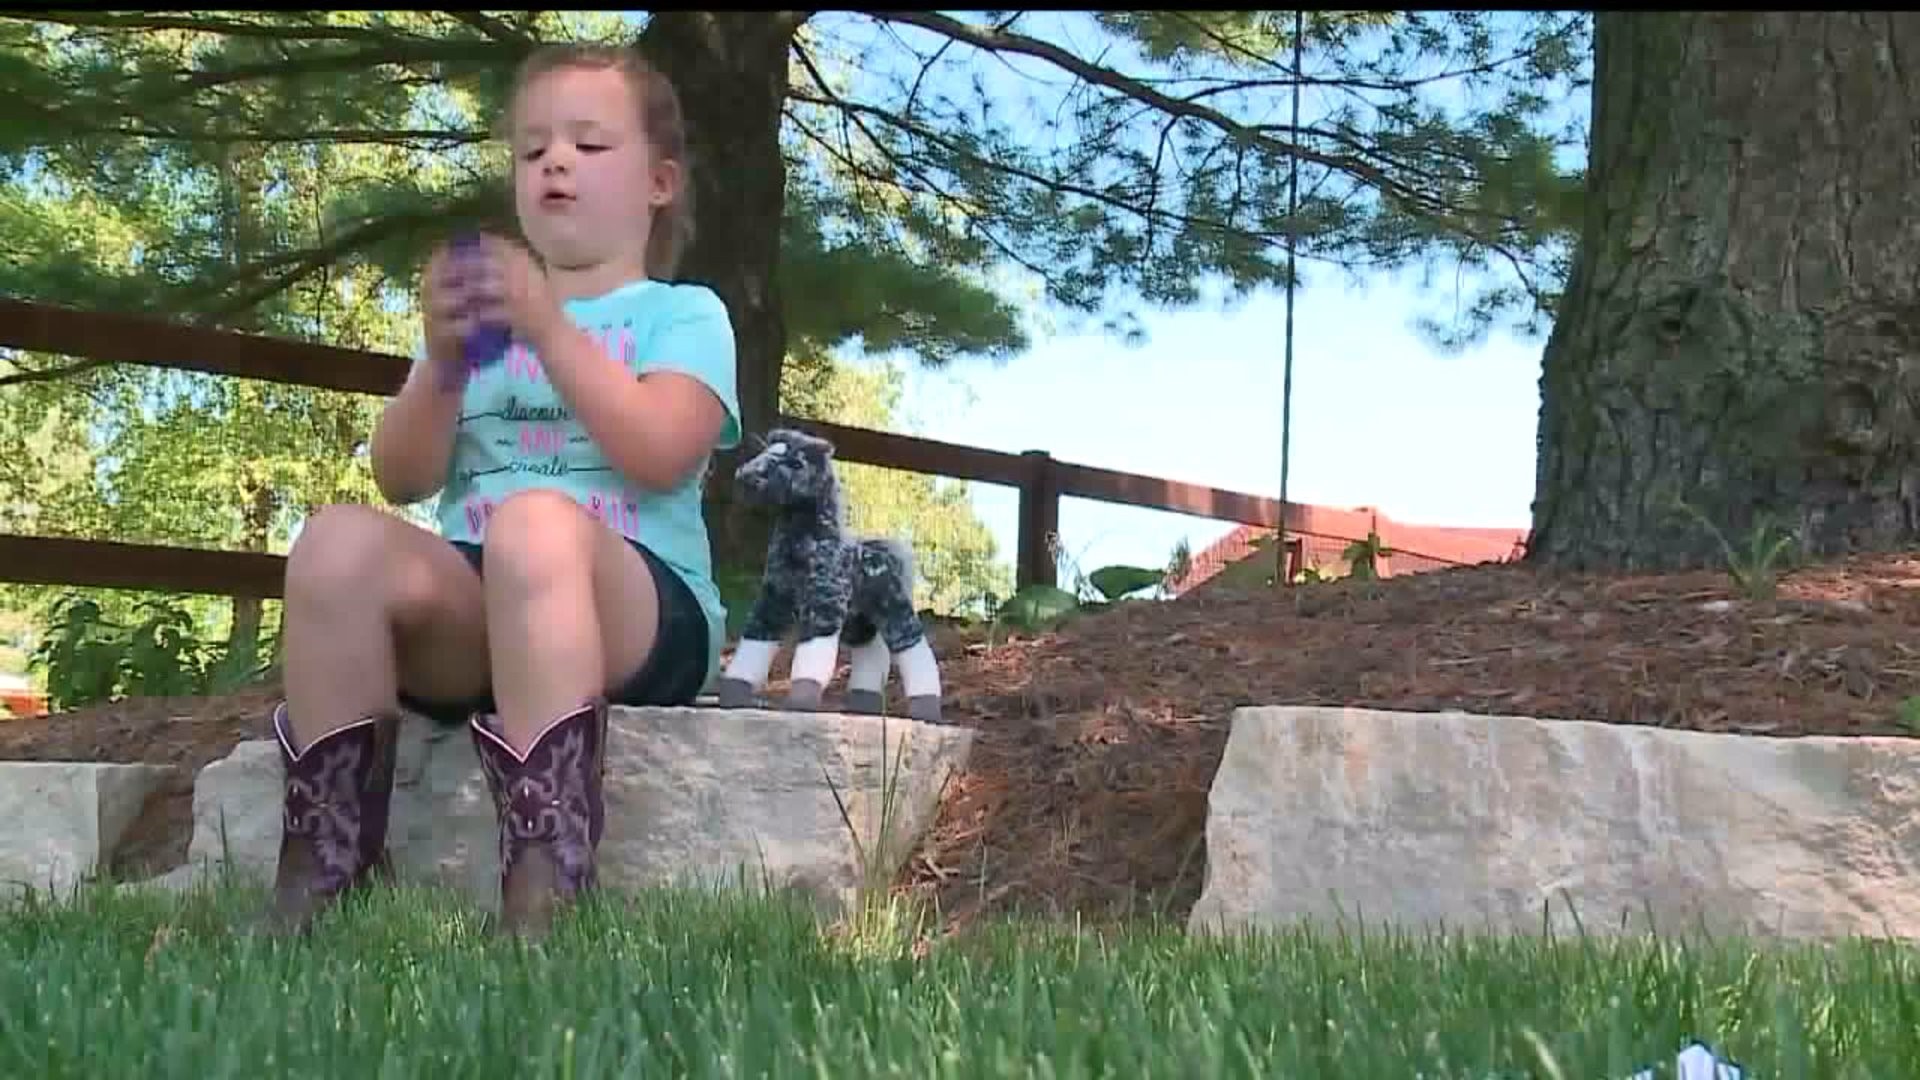 Little girl raises money to help rebuild stable after fire